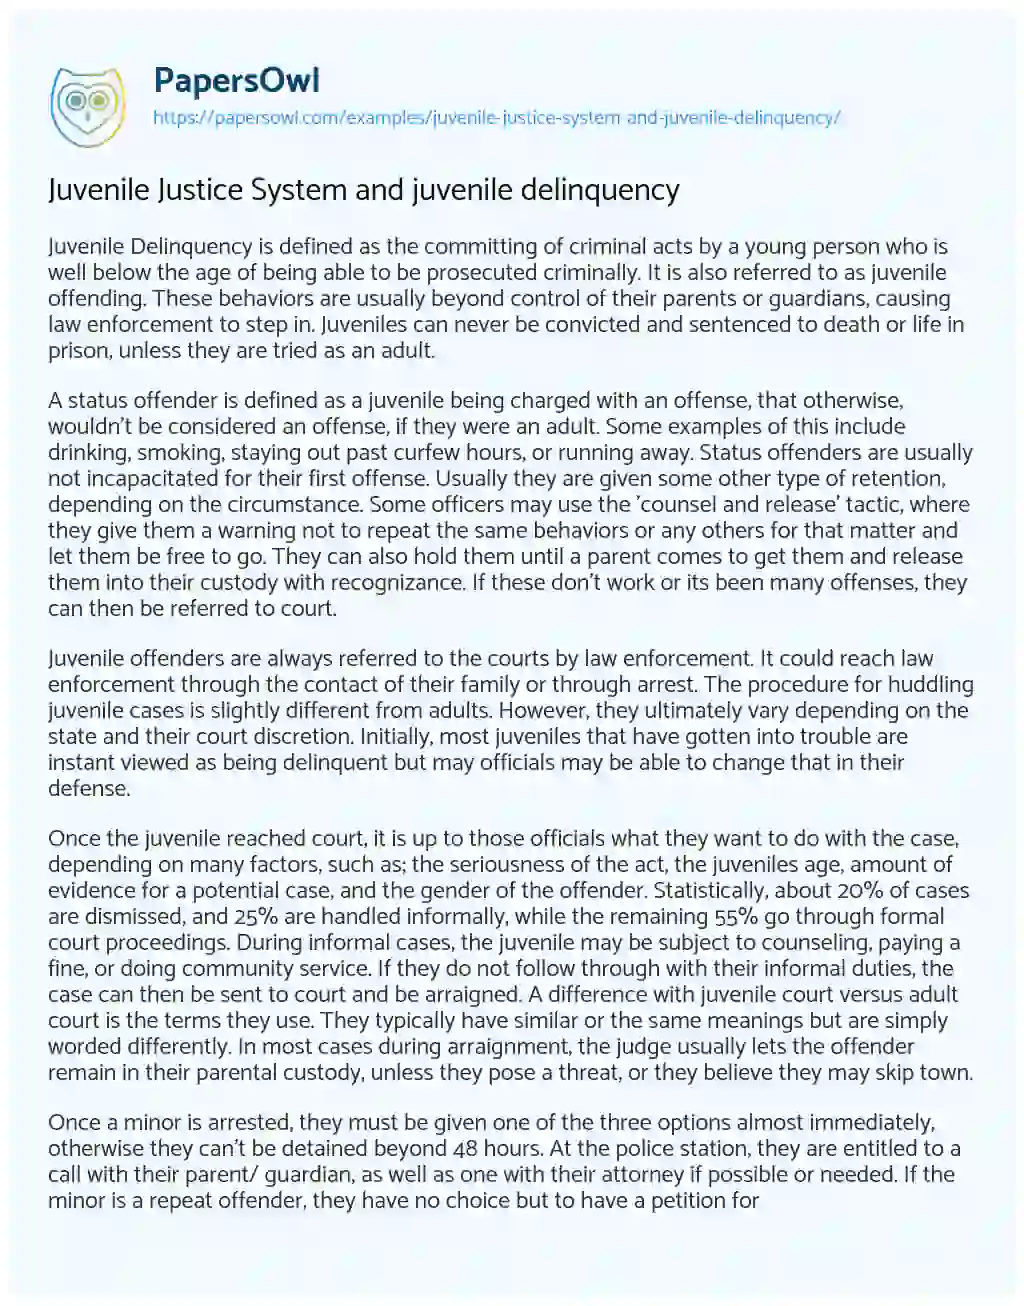 Essay on Juvenile Justice System and Juvenile Delinquency